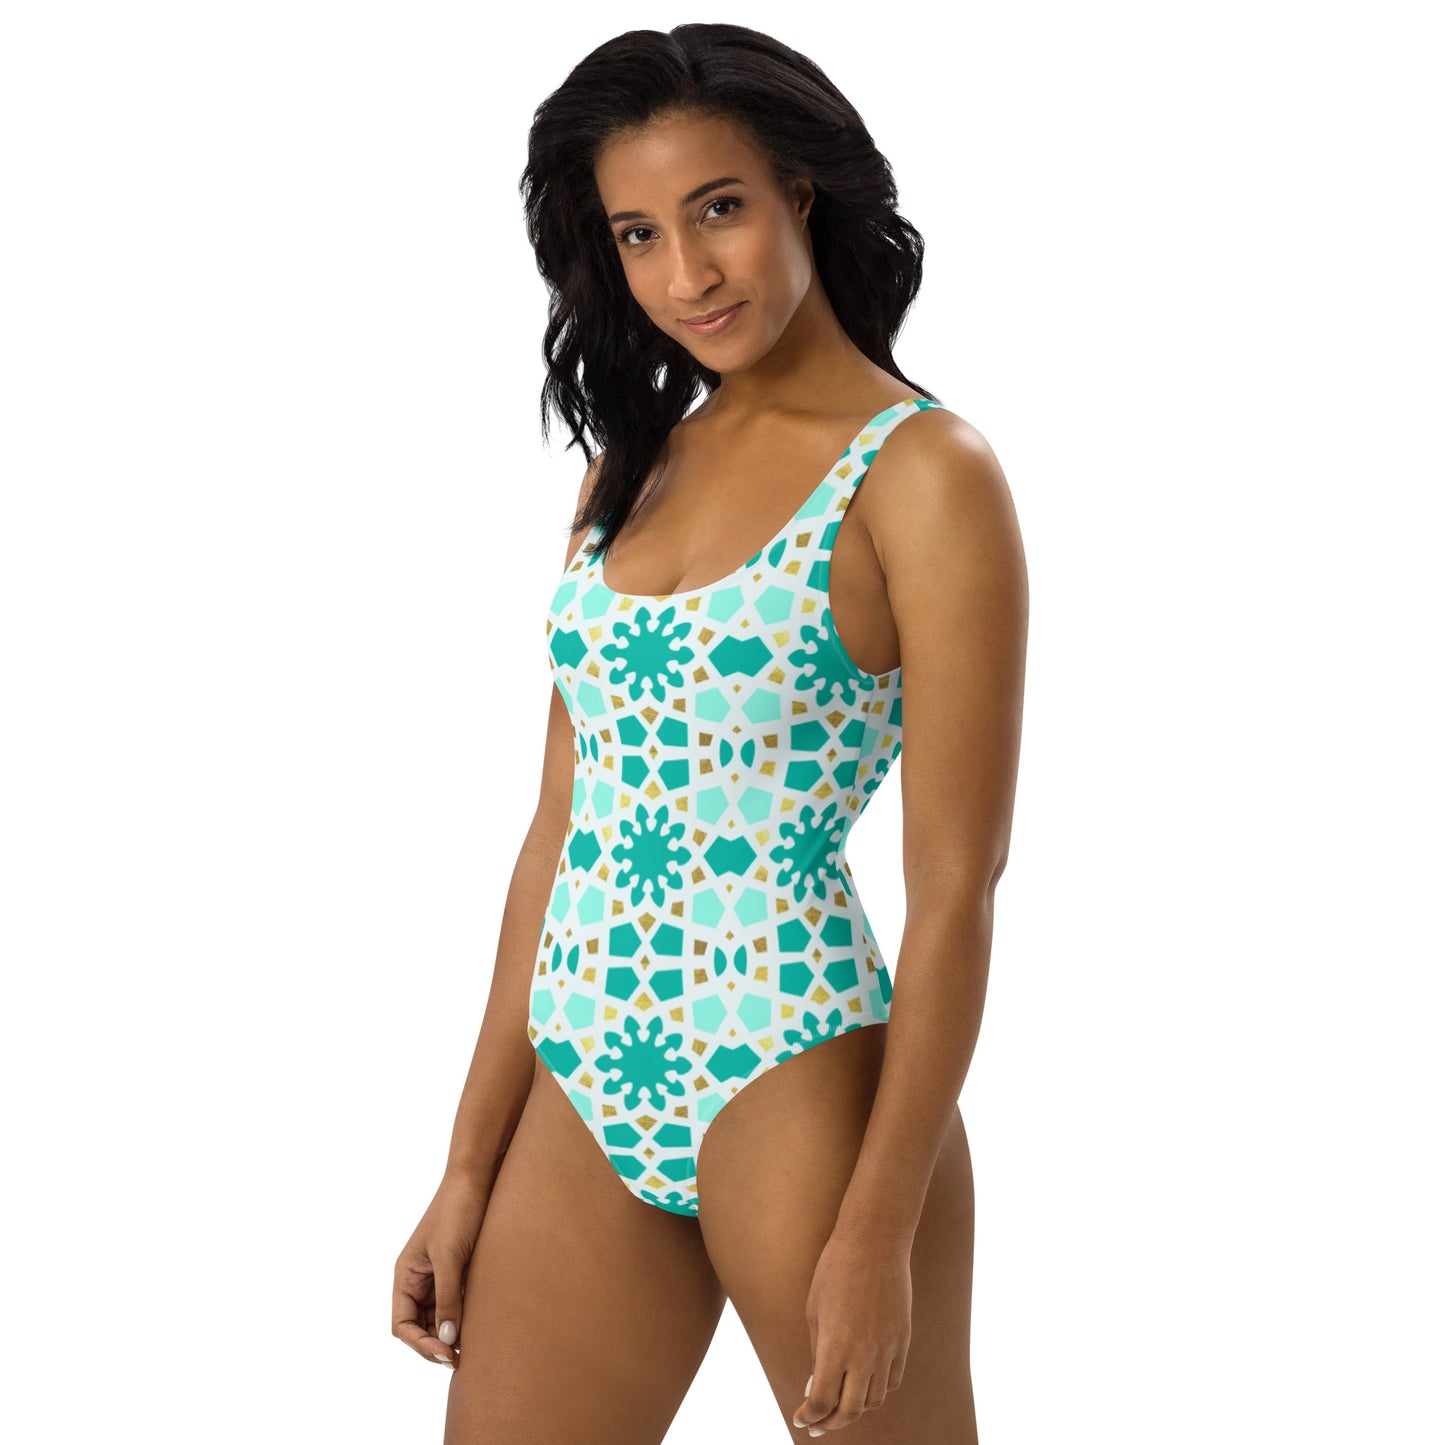 One-Piece Swimsuit - Geometric Arabesque Pattern in Mint and Gold